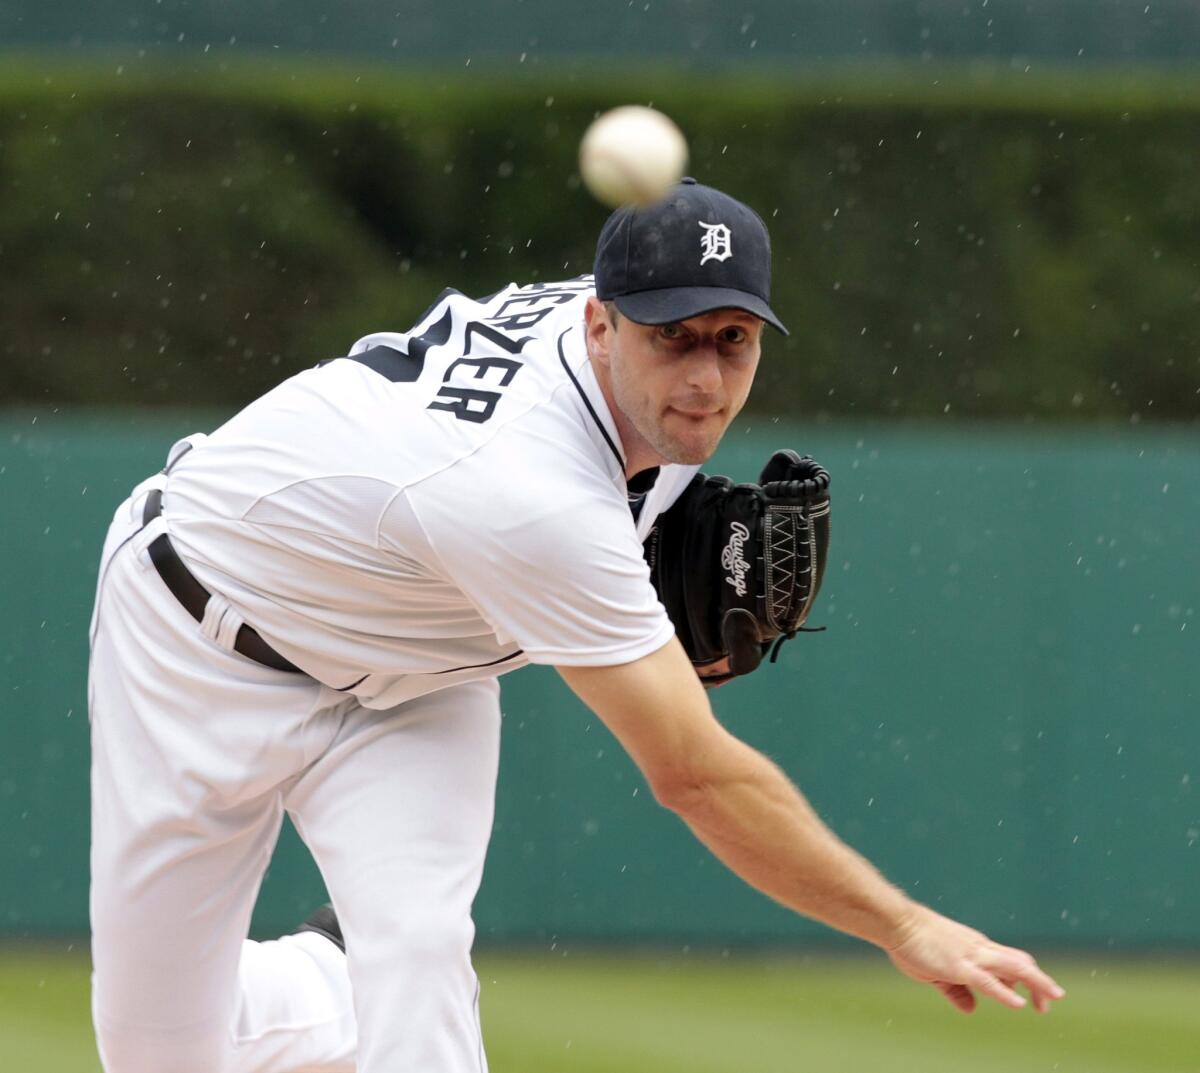 Detroit starter Max Scherzer delivers a pitch during the Tigers' 3-2 win over the Kansas City Royals.